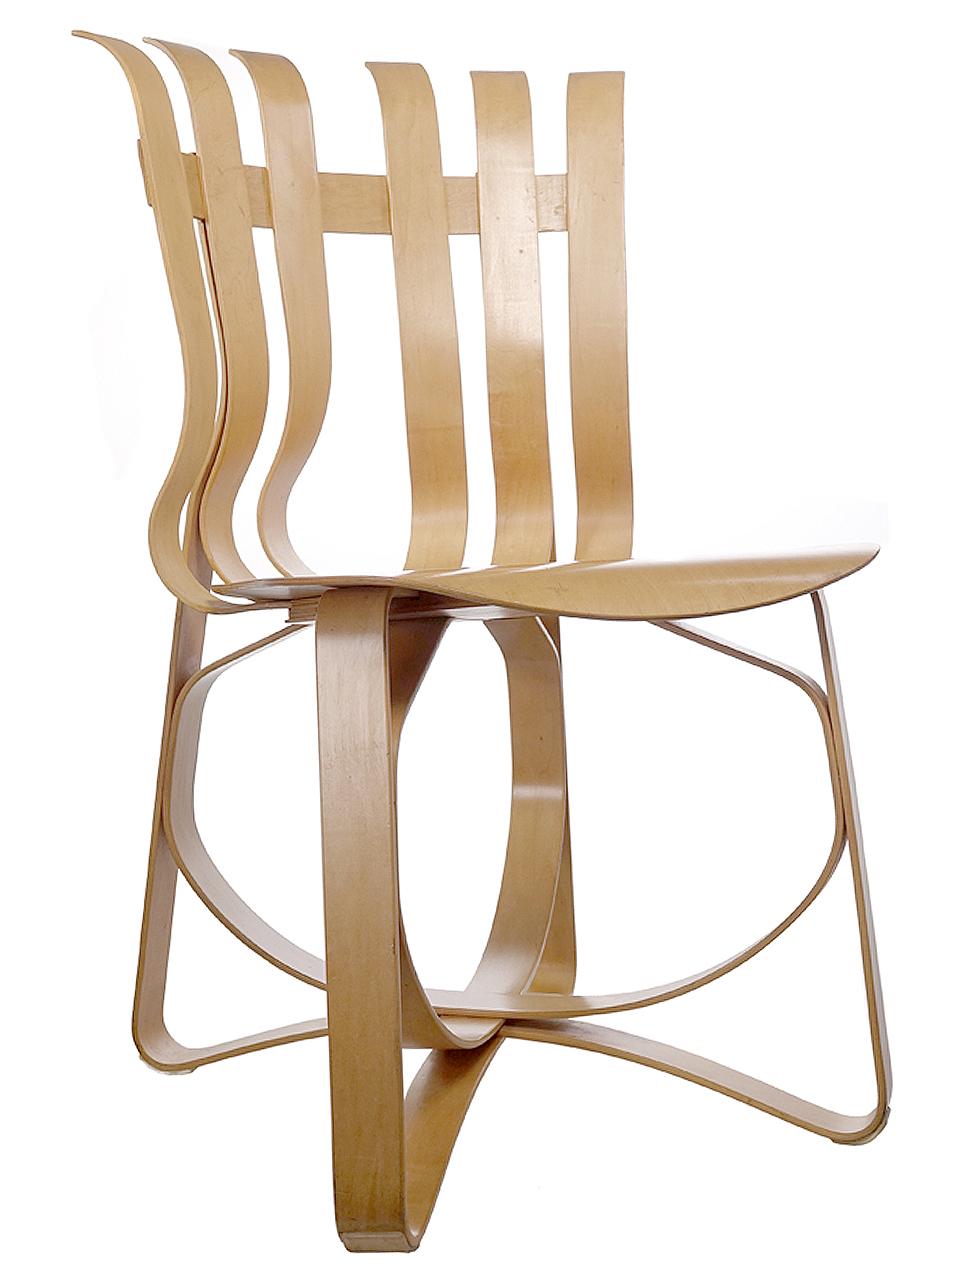 Light Wood Hat Trick Chairs by Frank Gehry for Knoll, Pair 2